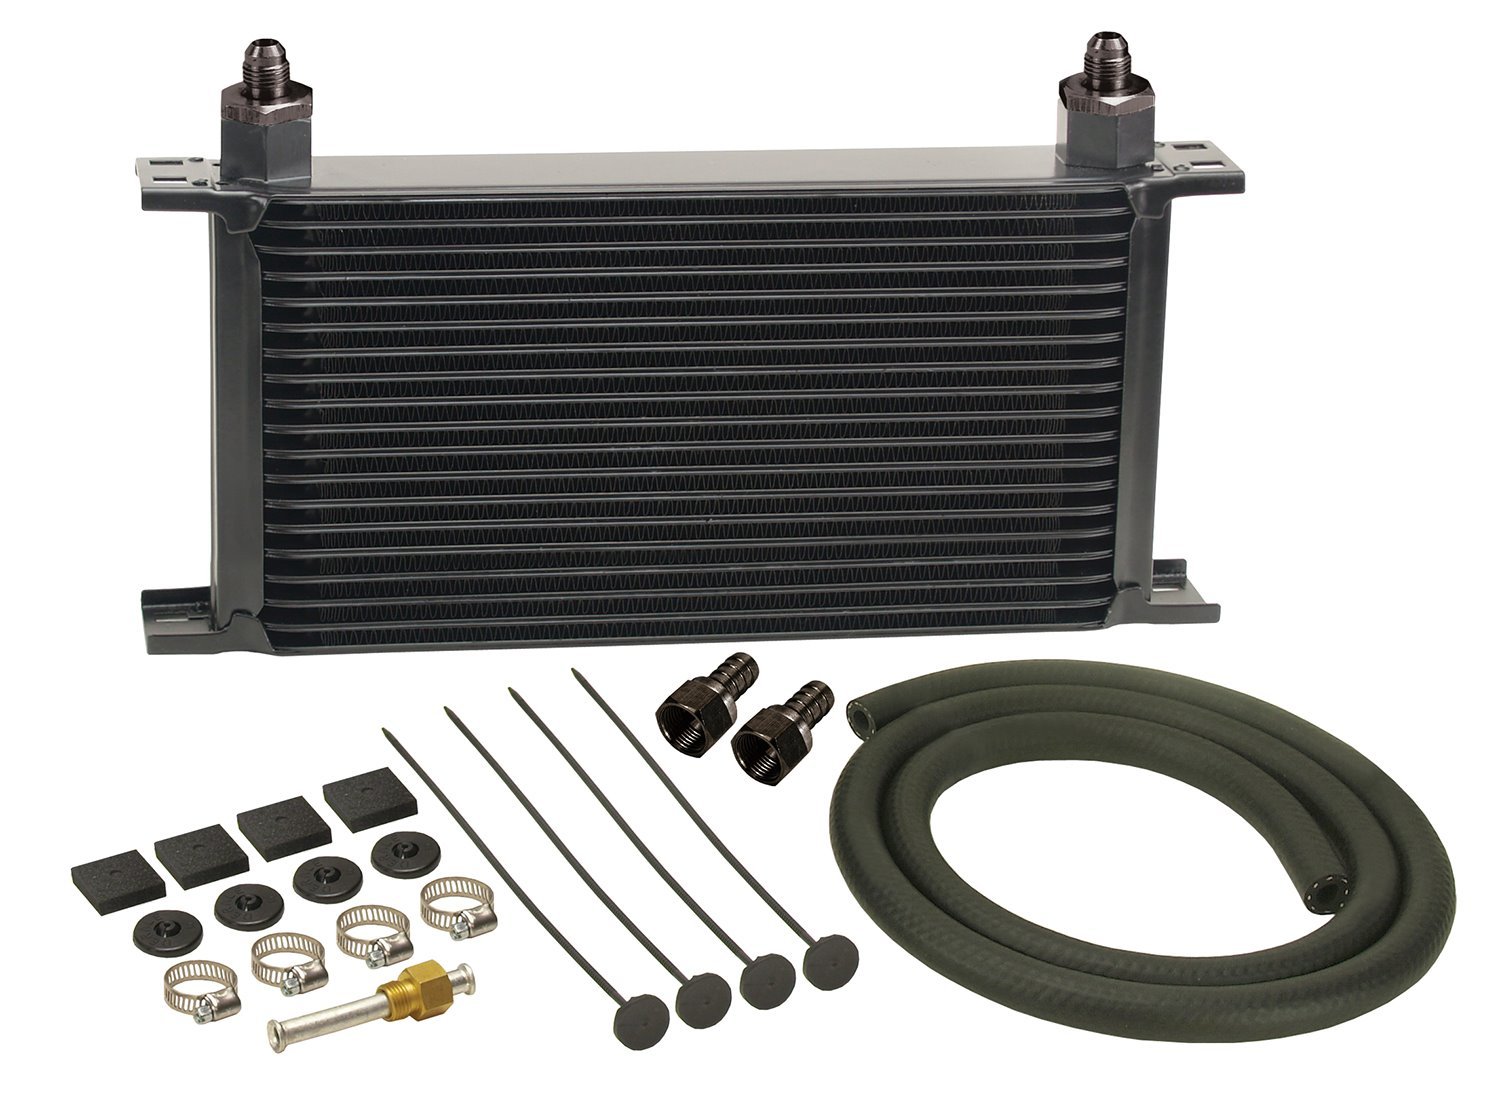 19 Row Stacked Plate Transmission Cooler Kit Width: 13"